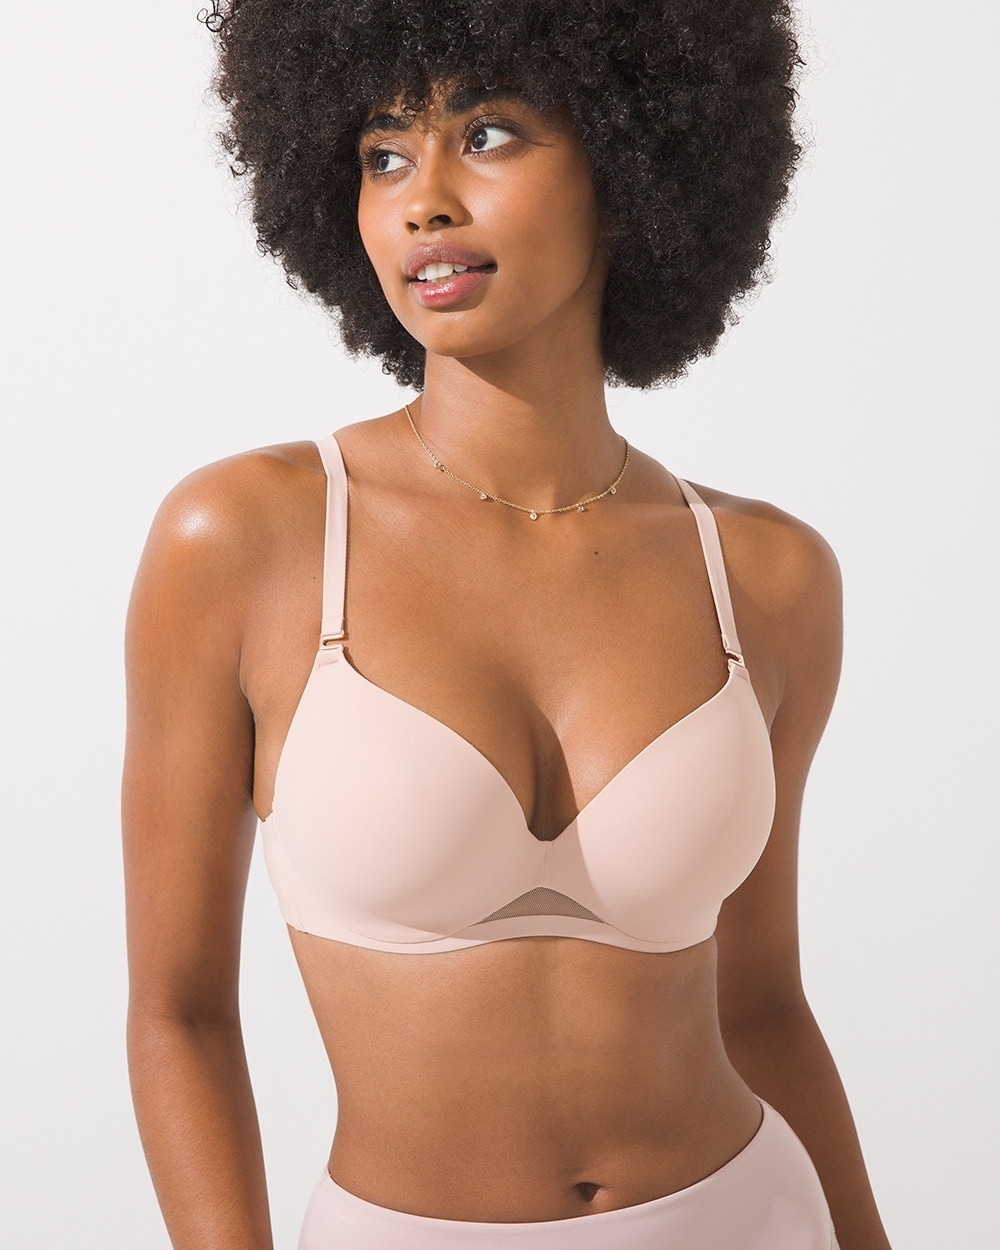 Get yourself some lift and push with these double padded bras. Look your  best, feel confident and look elegant in your outfit. Let all ey